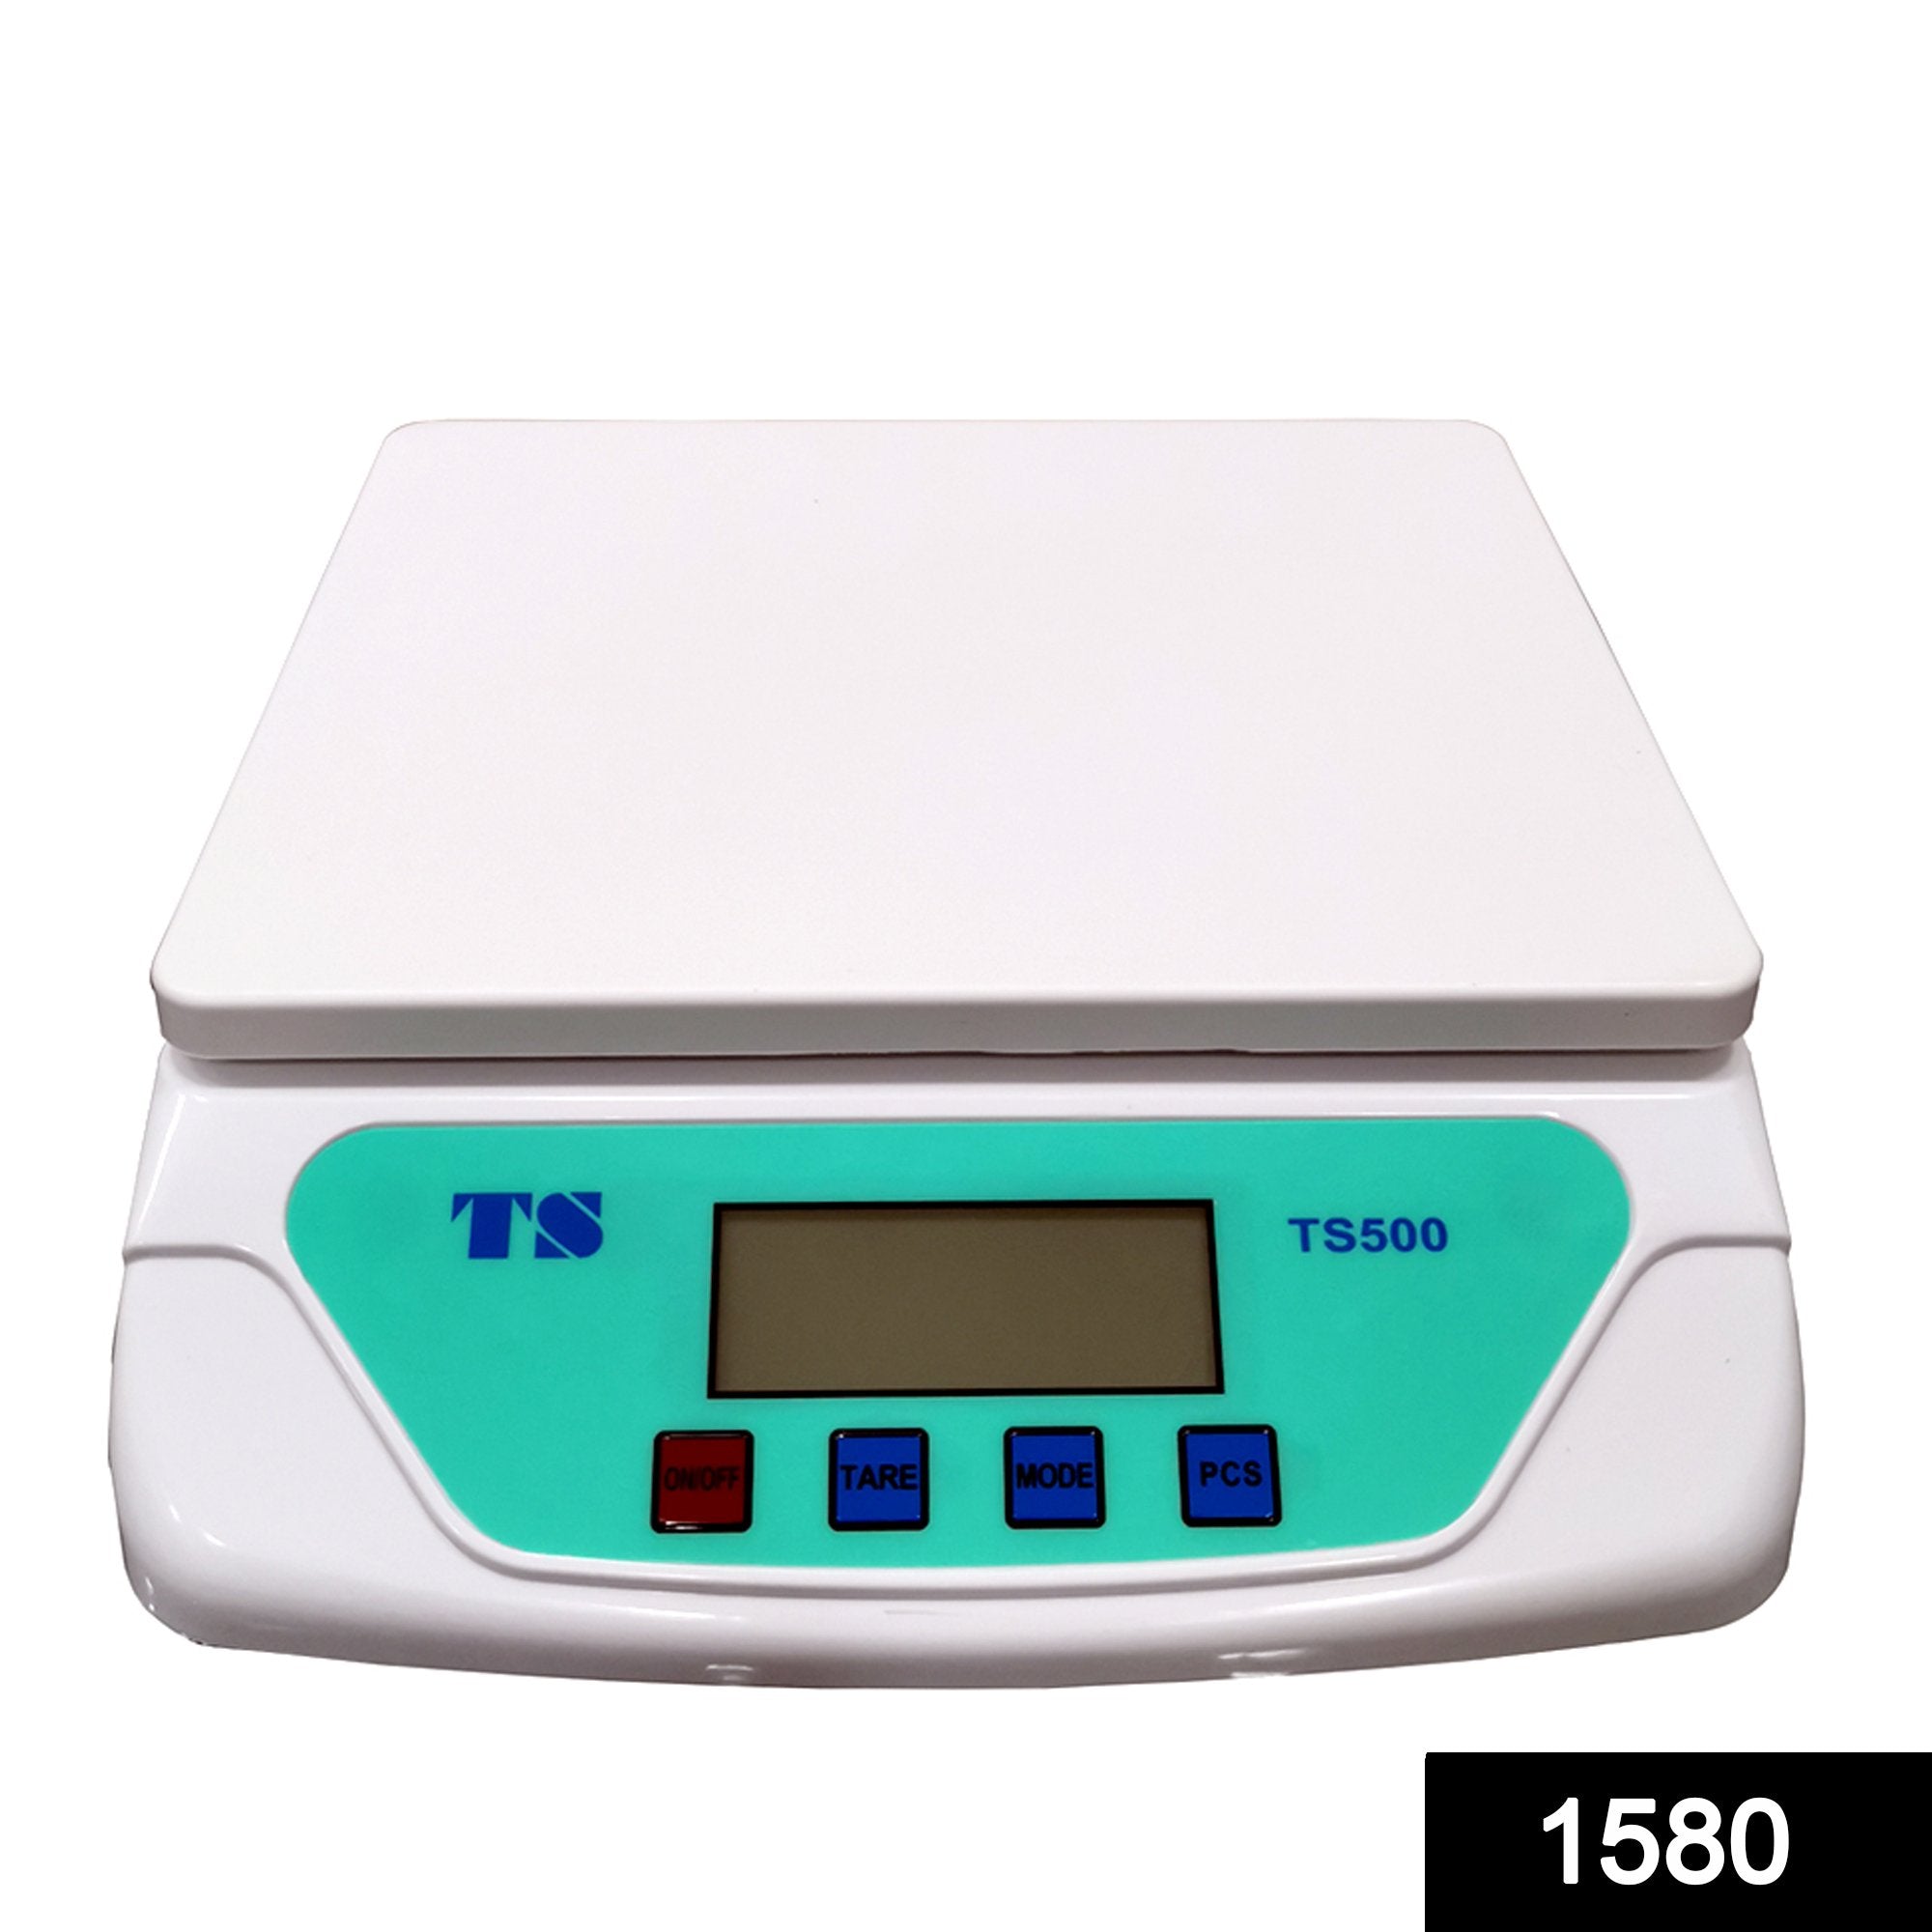 1580 Digital Multi-Purpose Kitchen Weighing Scale (TS500) - SkyShopy